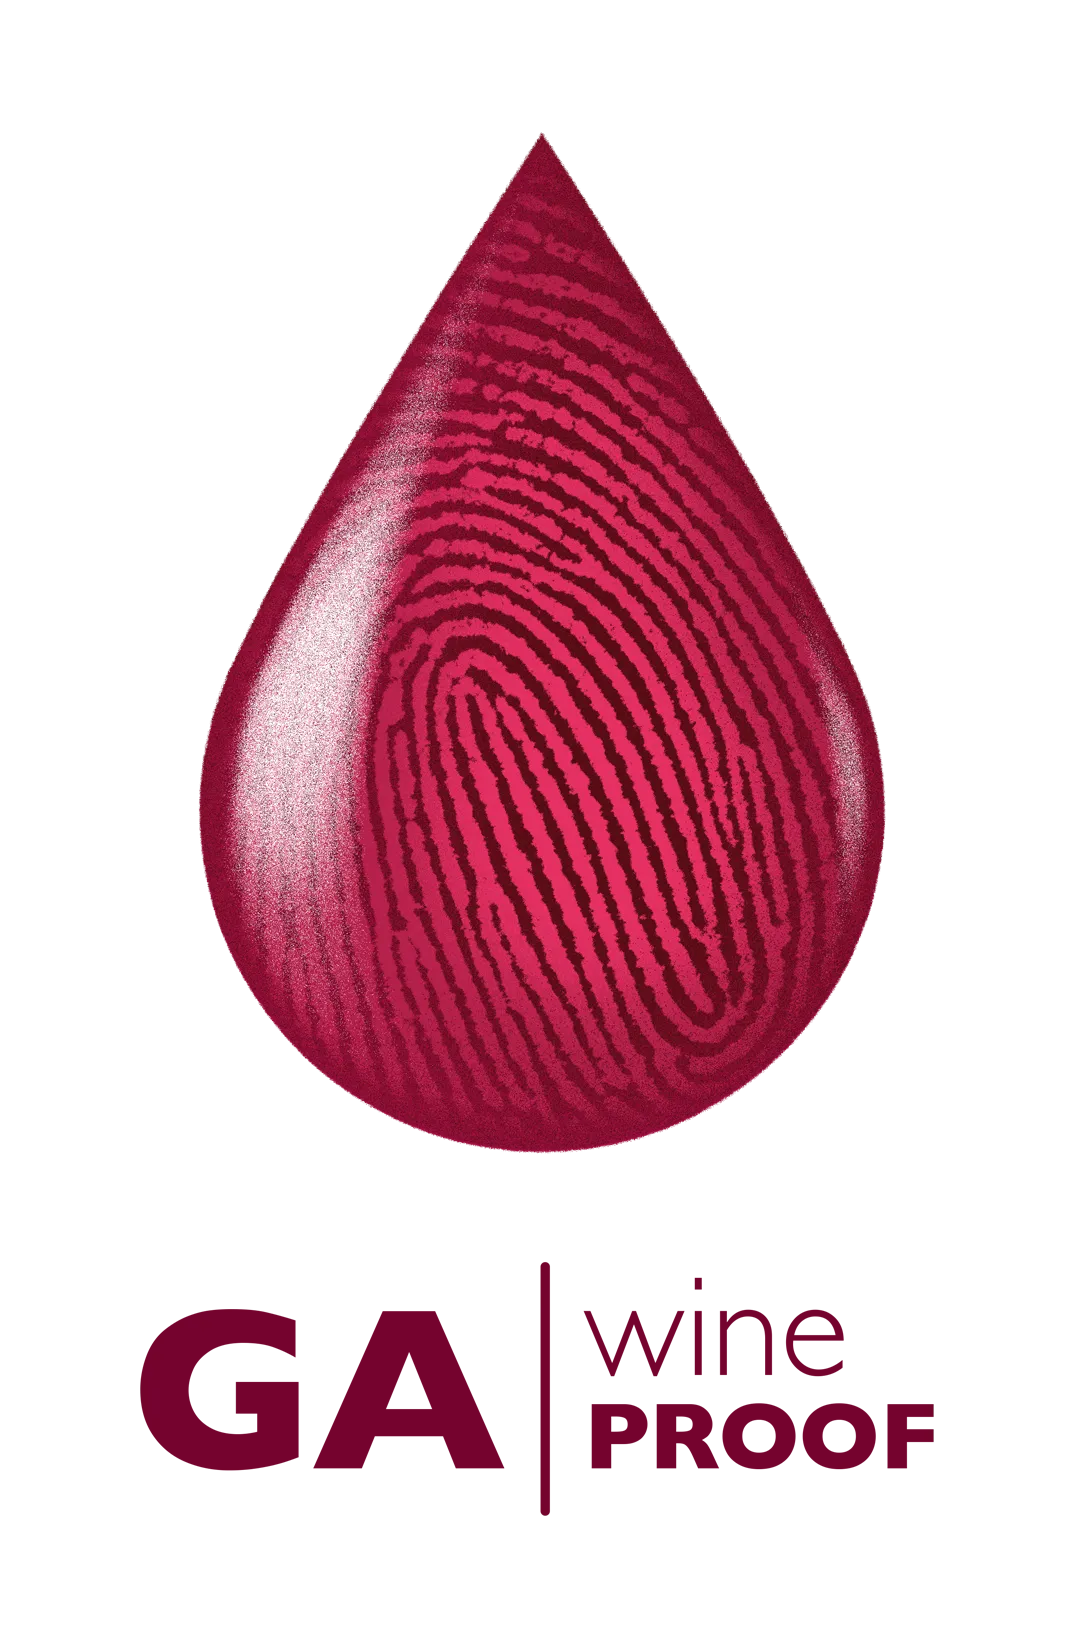 <span class='text-primary-1'> GA winePROOF</span> tests the <span class='text-primary-1'>authenticity</span> of your wine